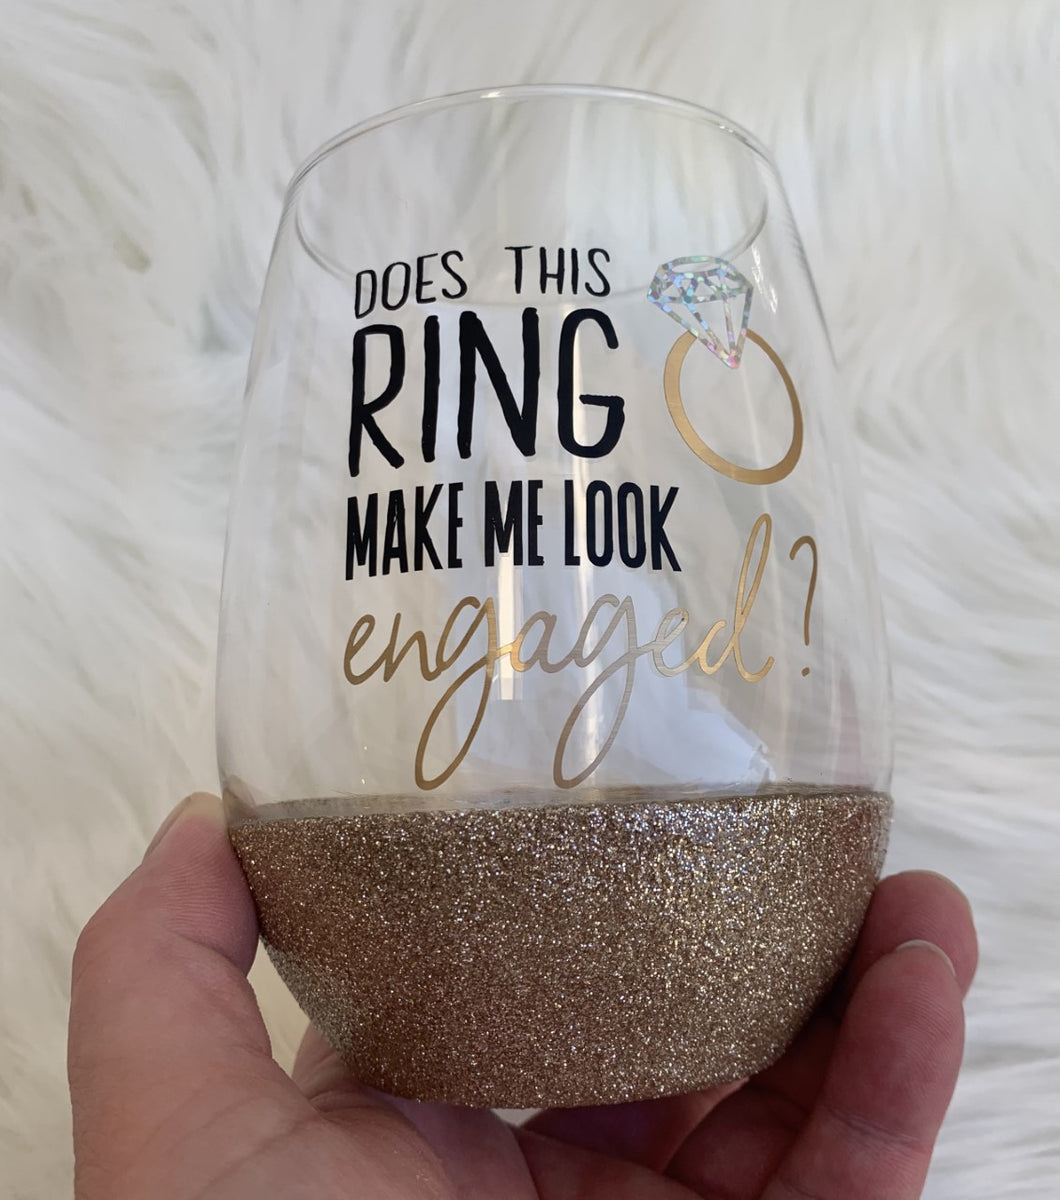 Does This Ring Make Me Look Engaged? Wine Glass